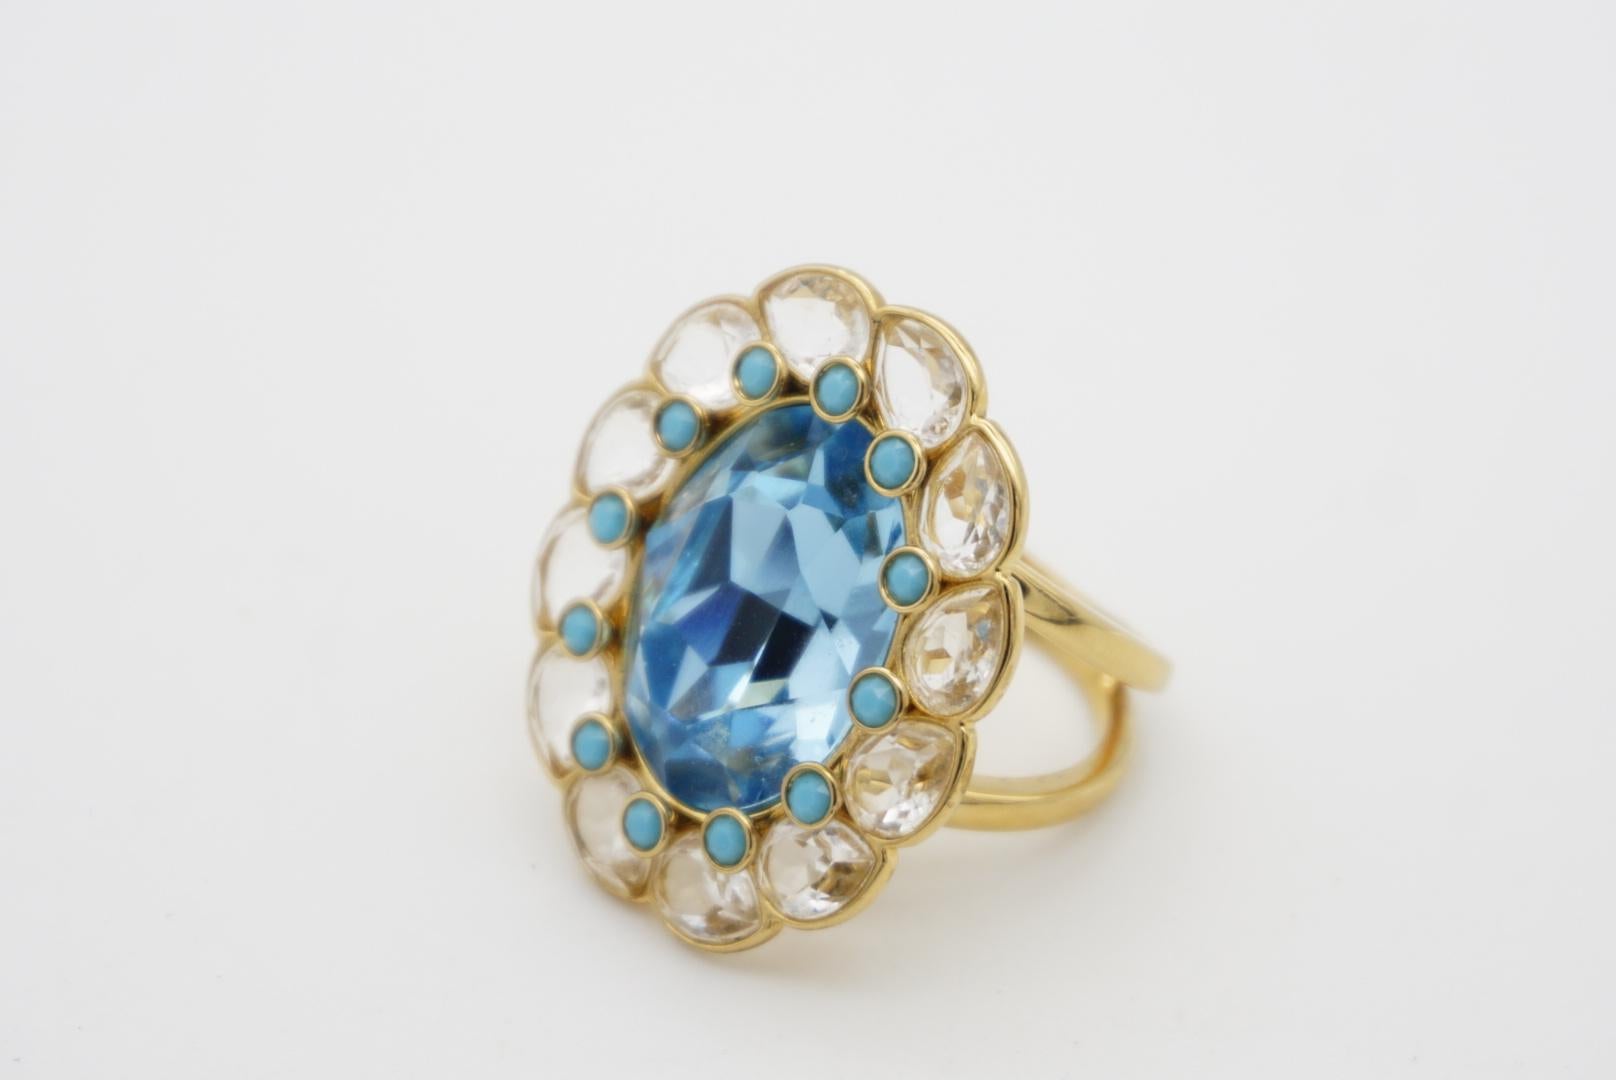 Swarovski Azore Blue Crystals Dots Clear Large Flower Cocktail Ring Size L 52 For Sale 2